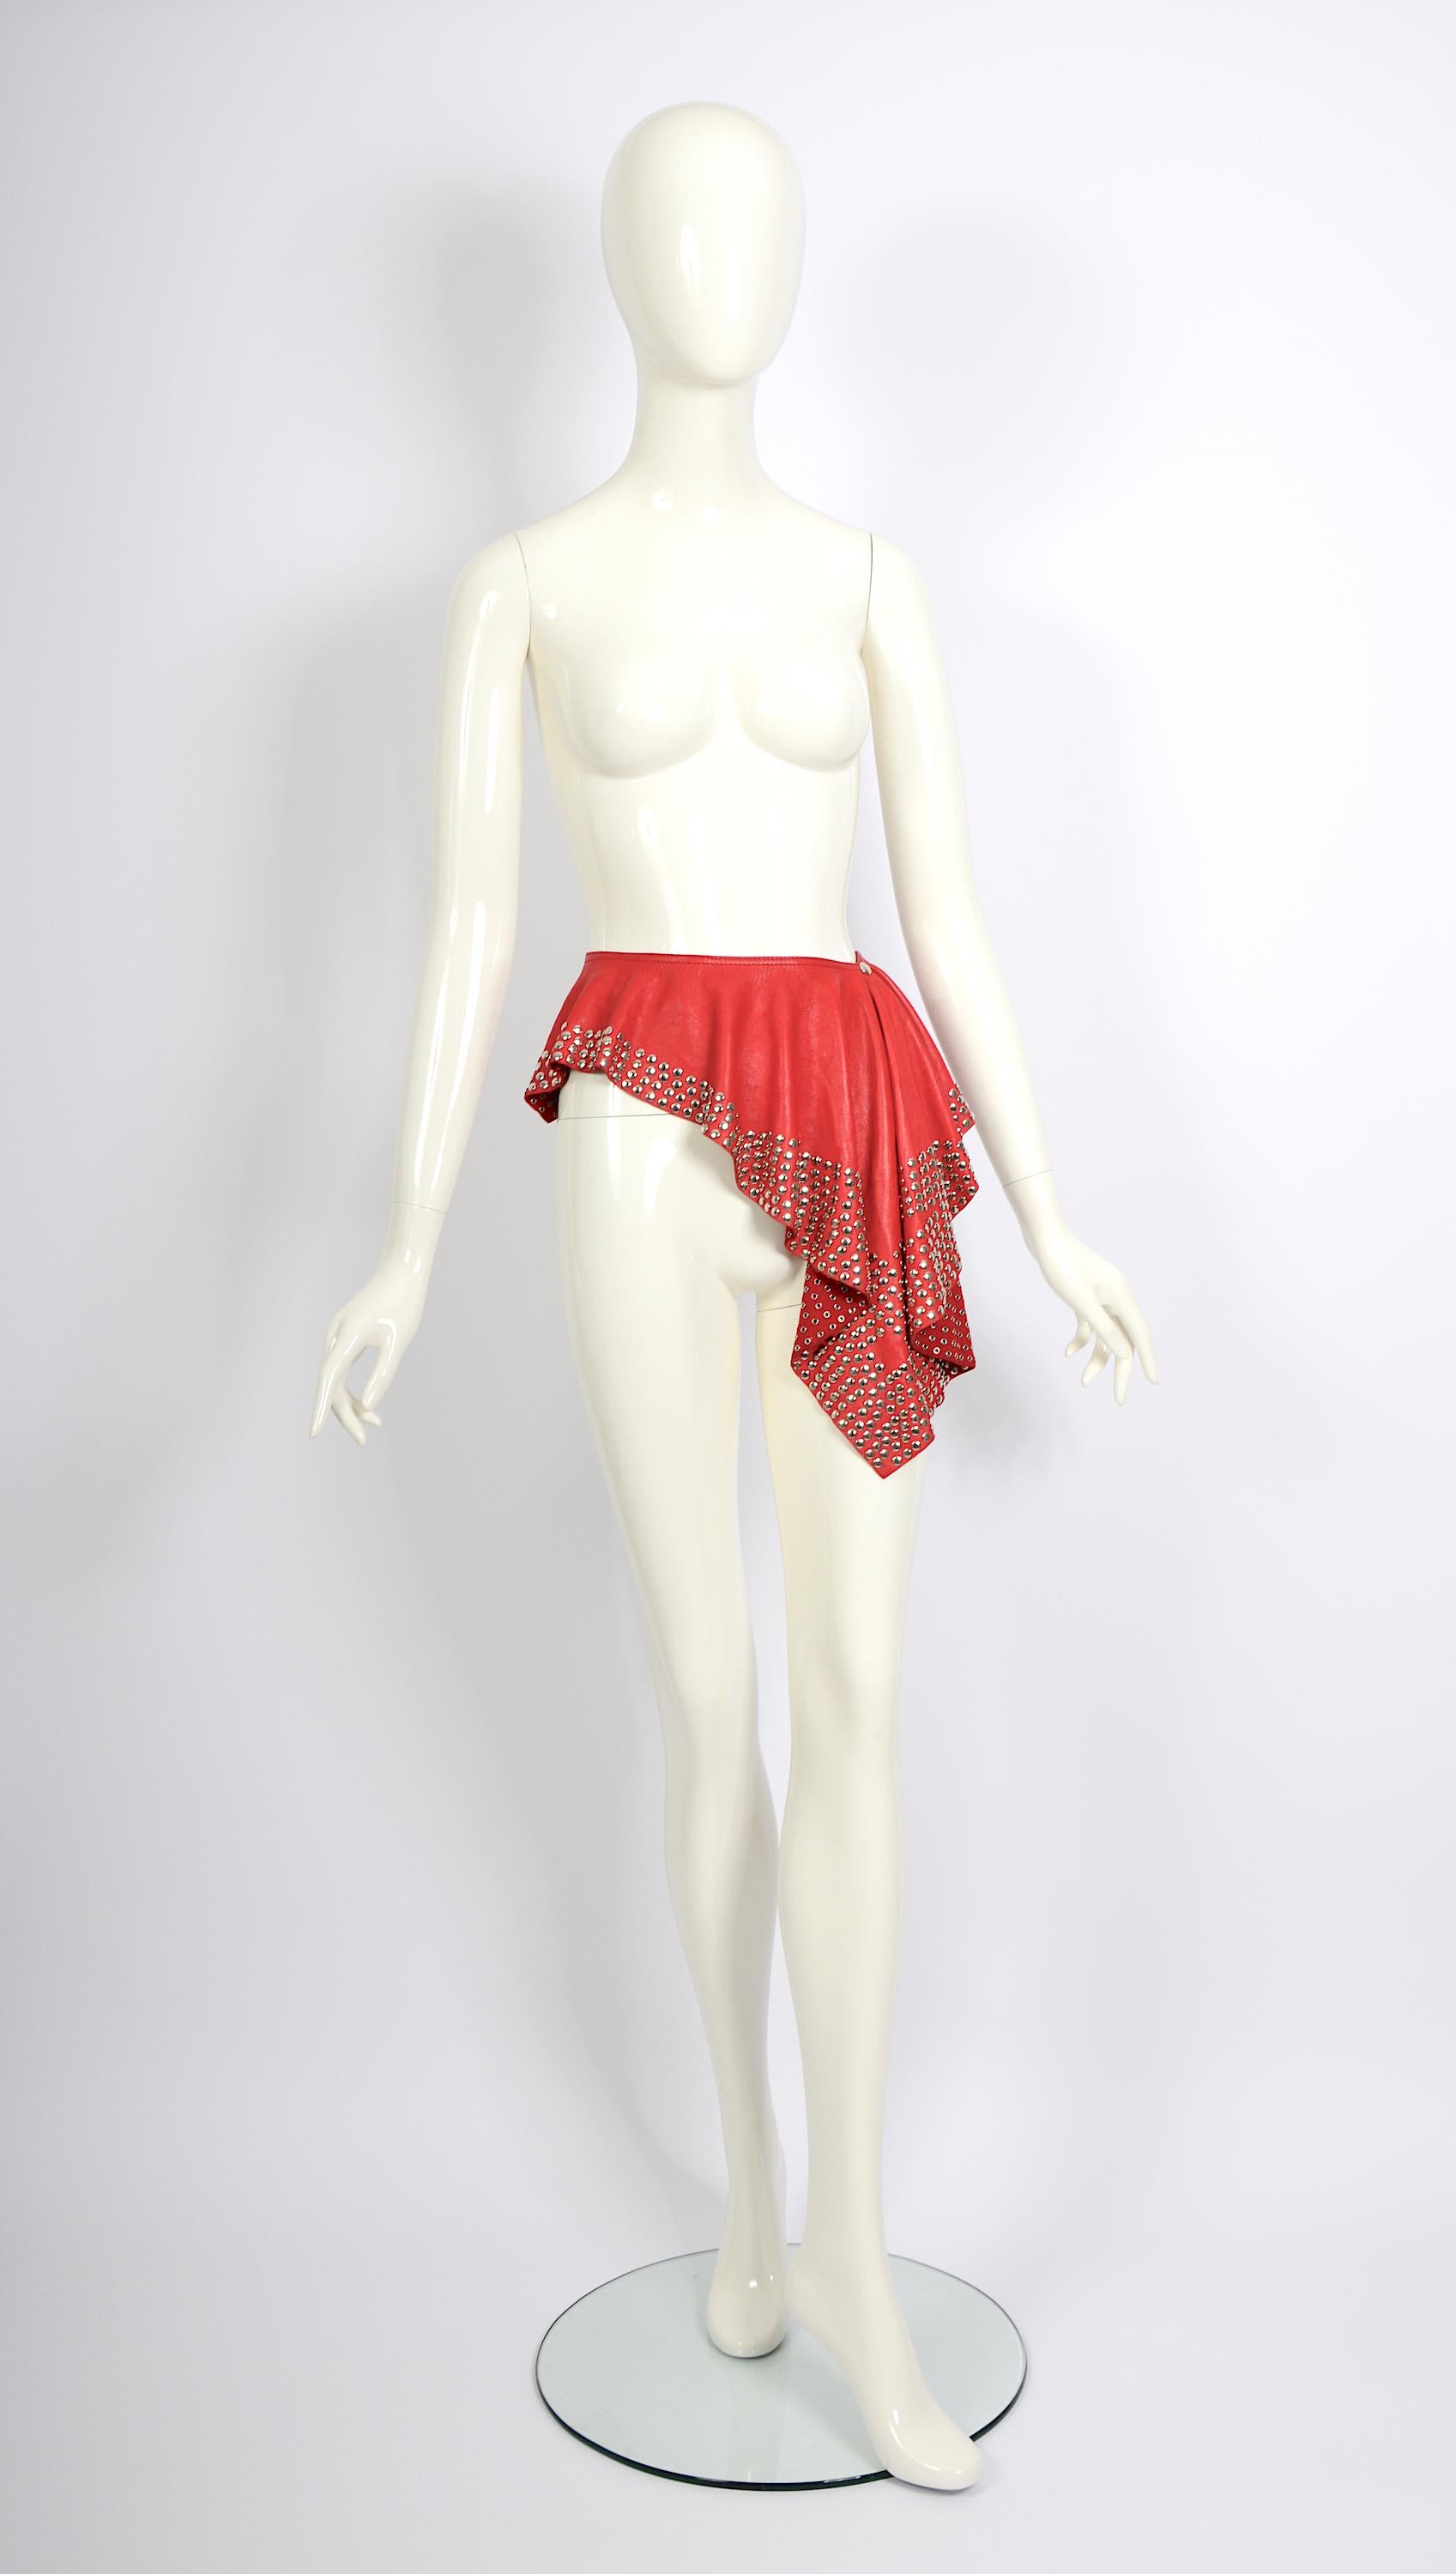 Azzedine Alaia circa 1981 collectors studded embellished red leather belt skirt In Excellent Condition For Sale In Antwerp, BE